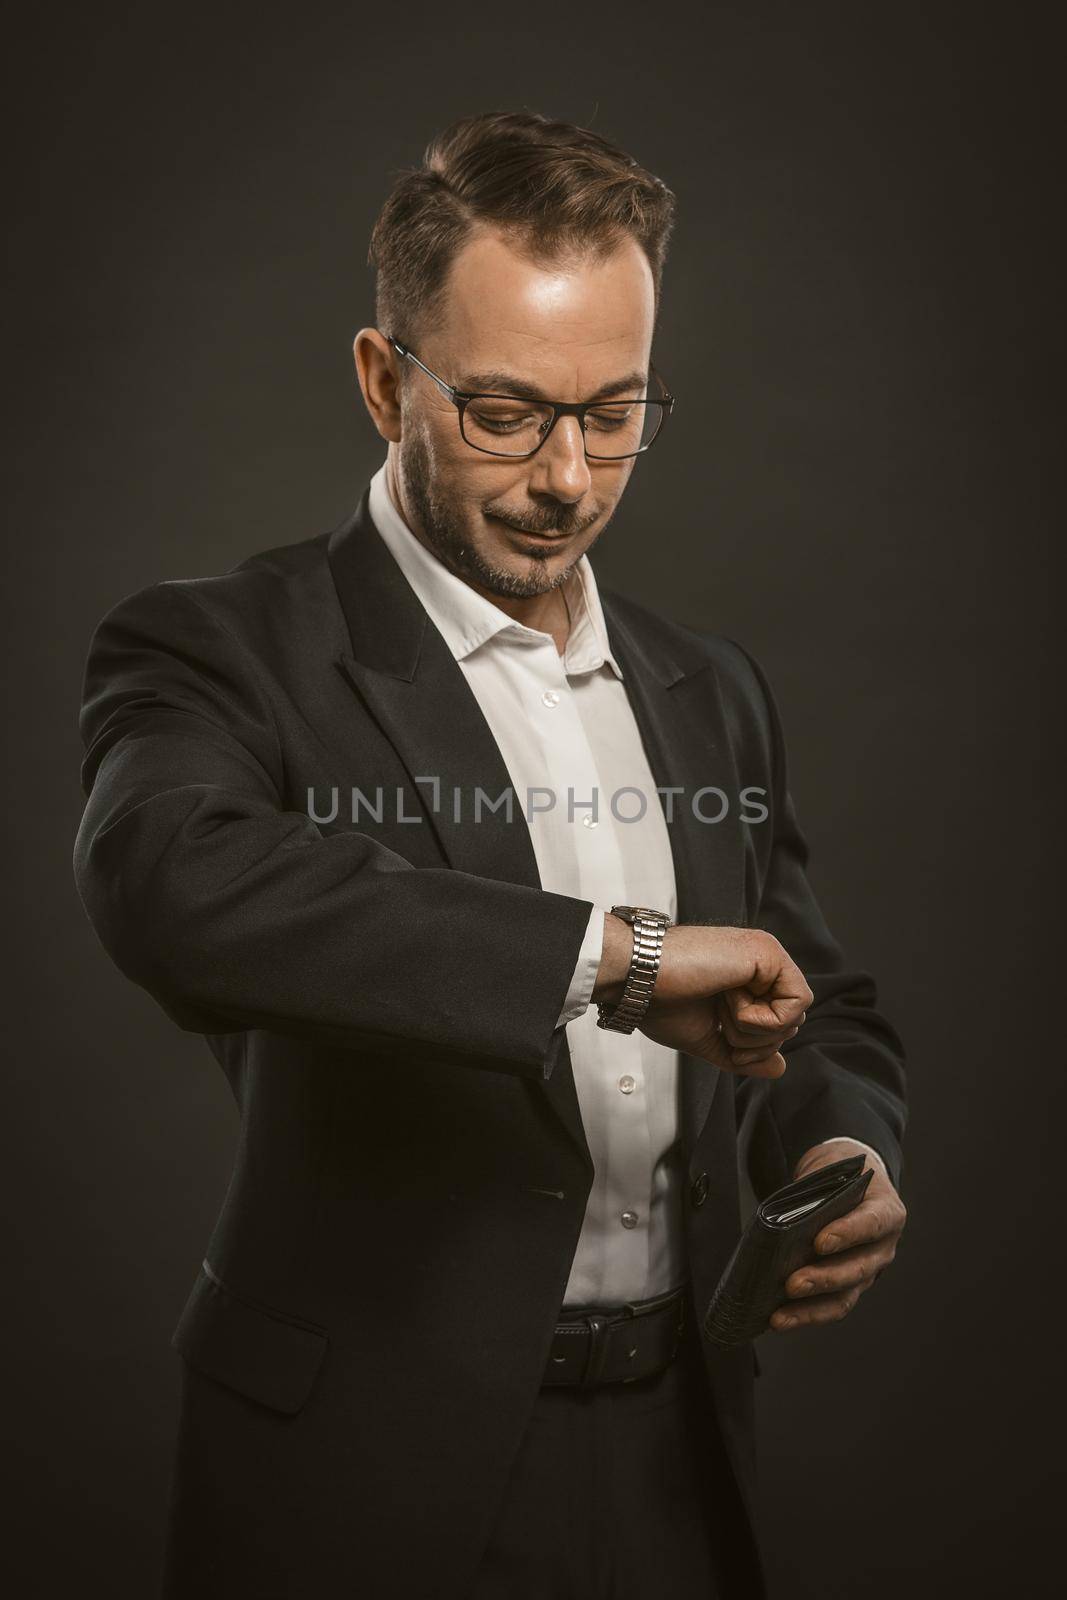 Businessman checks time looking at wristwatch. Friendly middle-aged man holds a purse in his hand while waiting for business meeting. Appointment concept. Toned image.